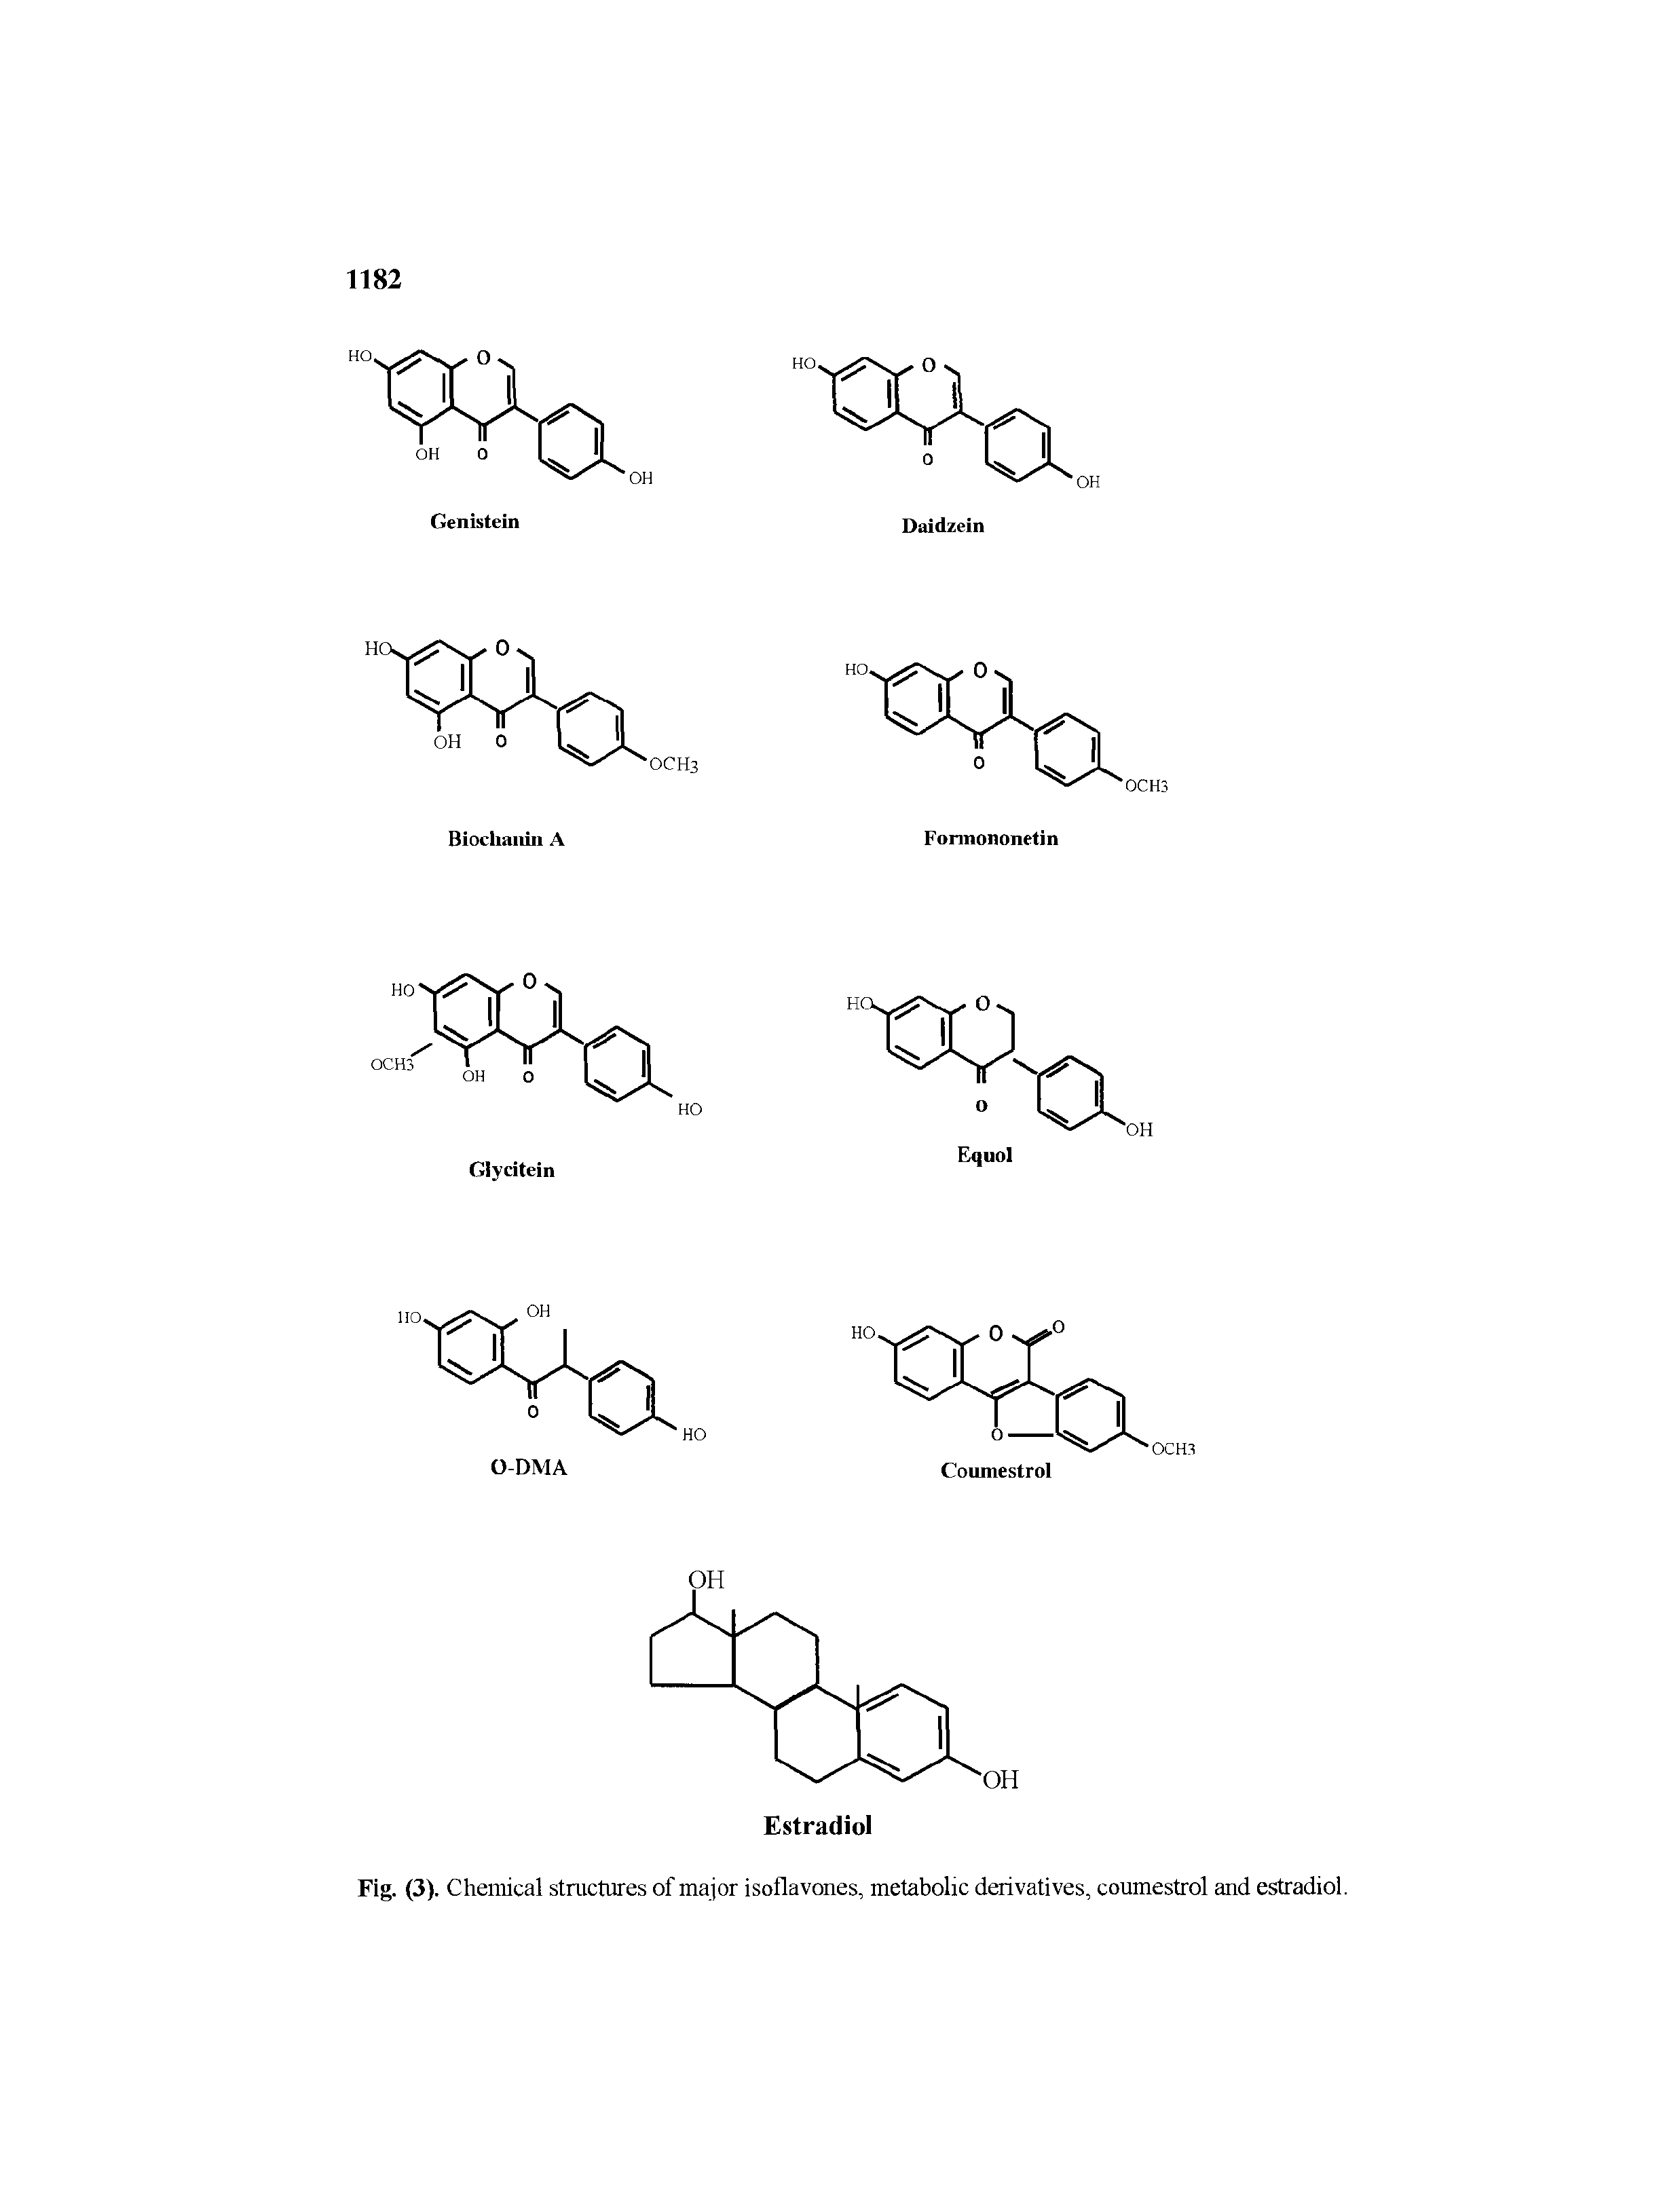 Fig. (3). Chemical structures of major isoflavones, metabolic derivatives, coumestrol and estradiol.